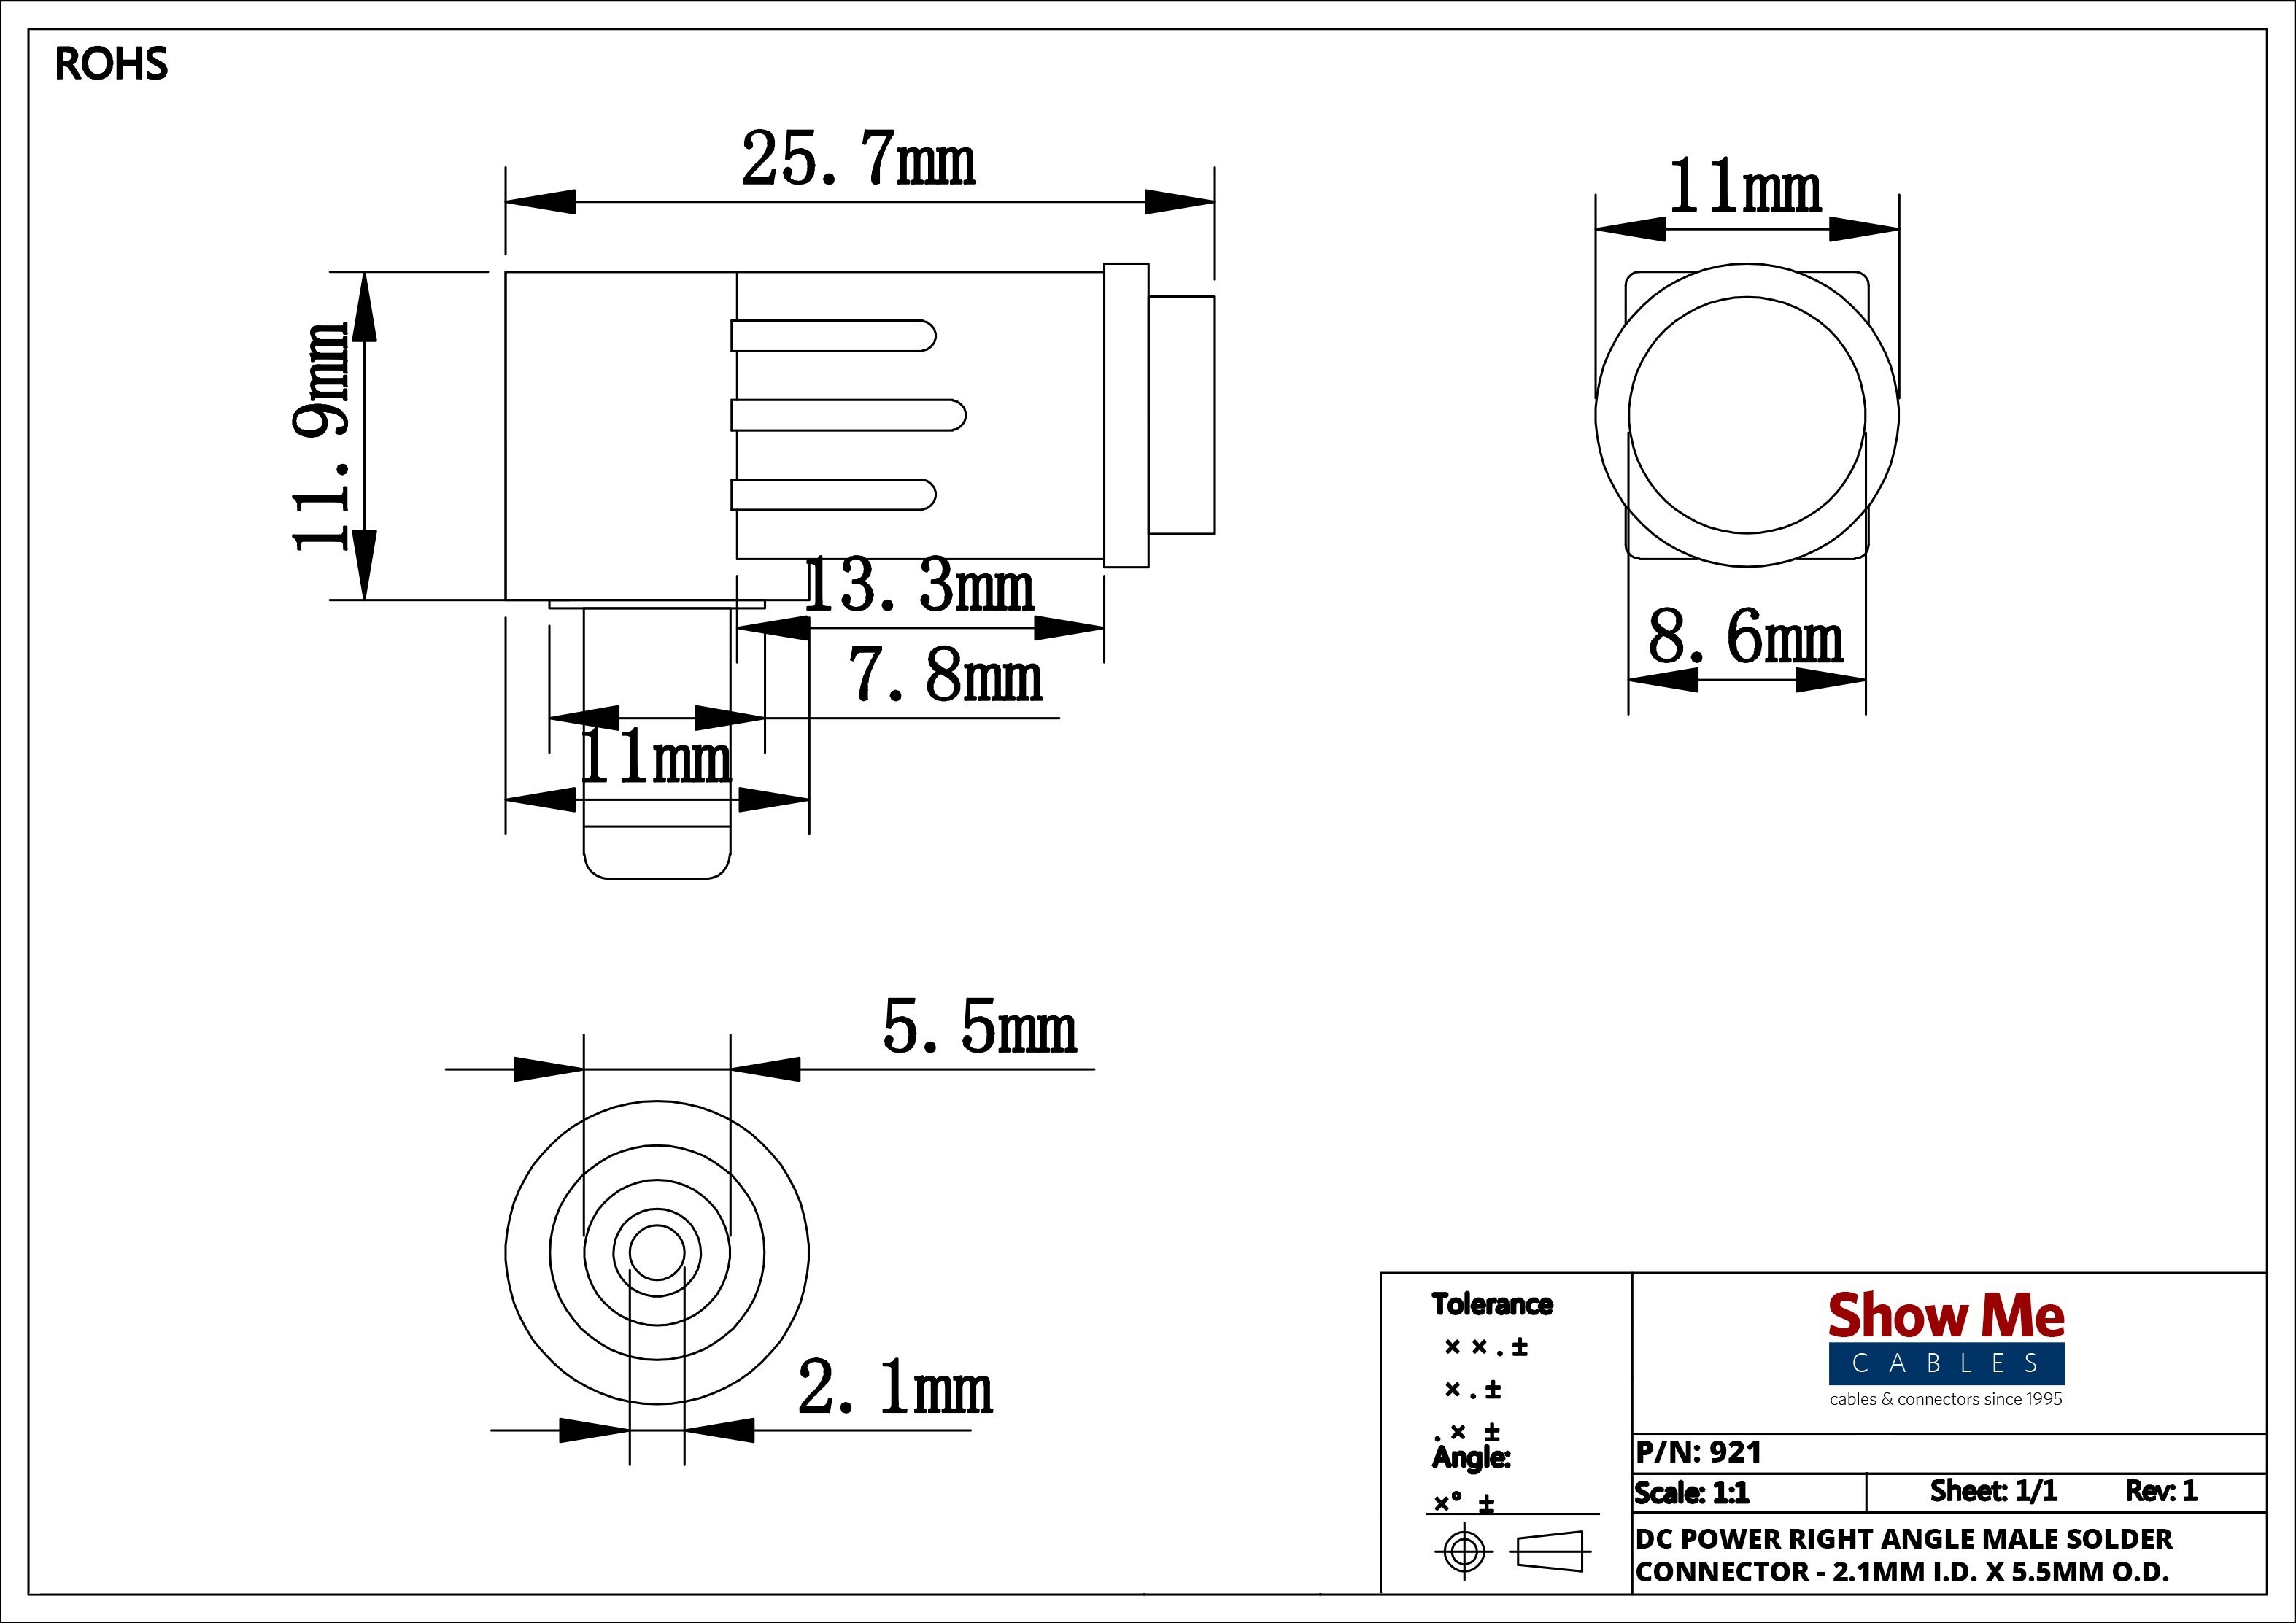 House Wiring Diagram Template New Electrical Circuit Diagram New 2 5mm Id 5 5mm Od Power